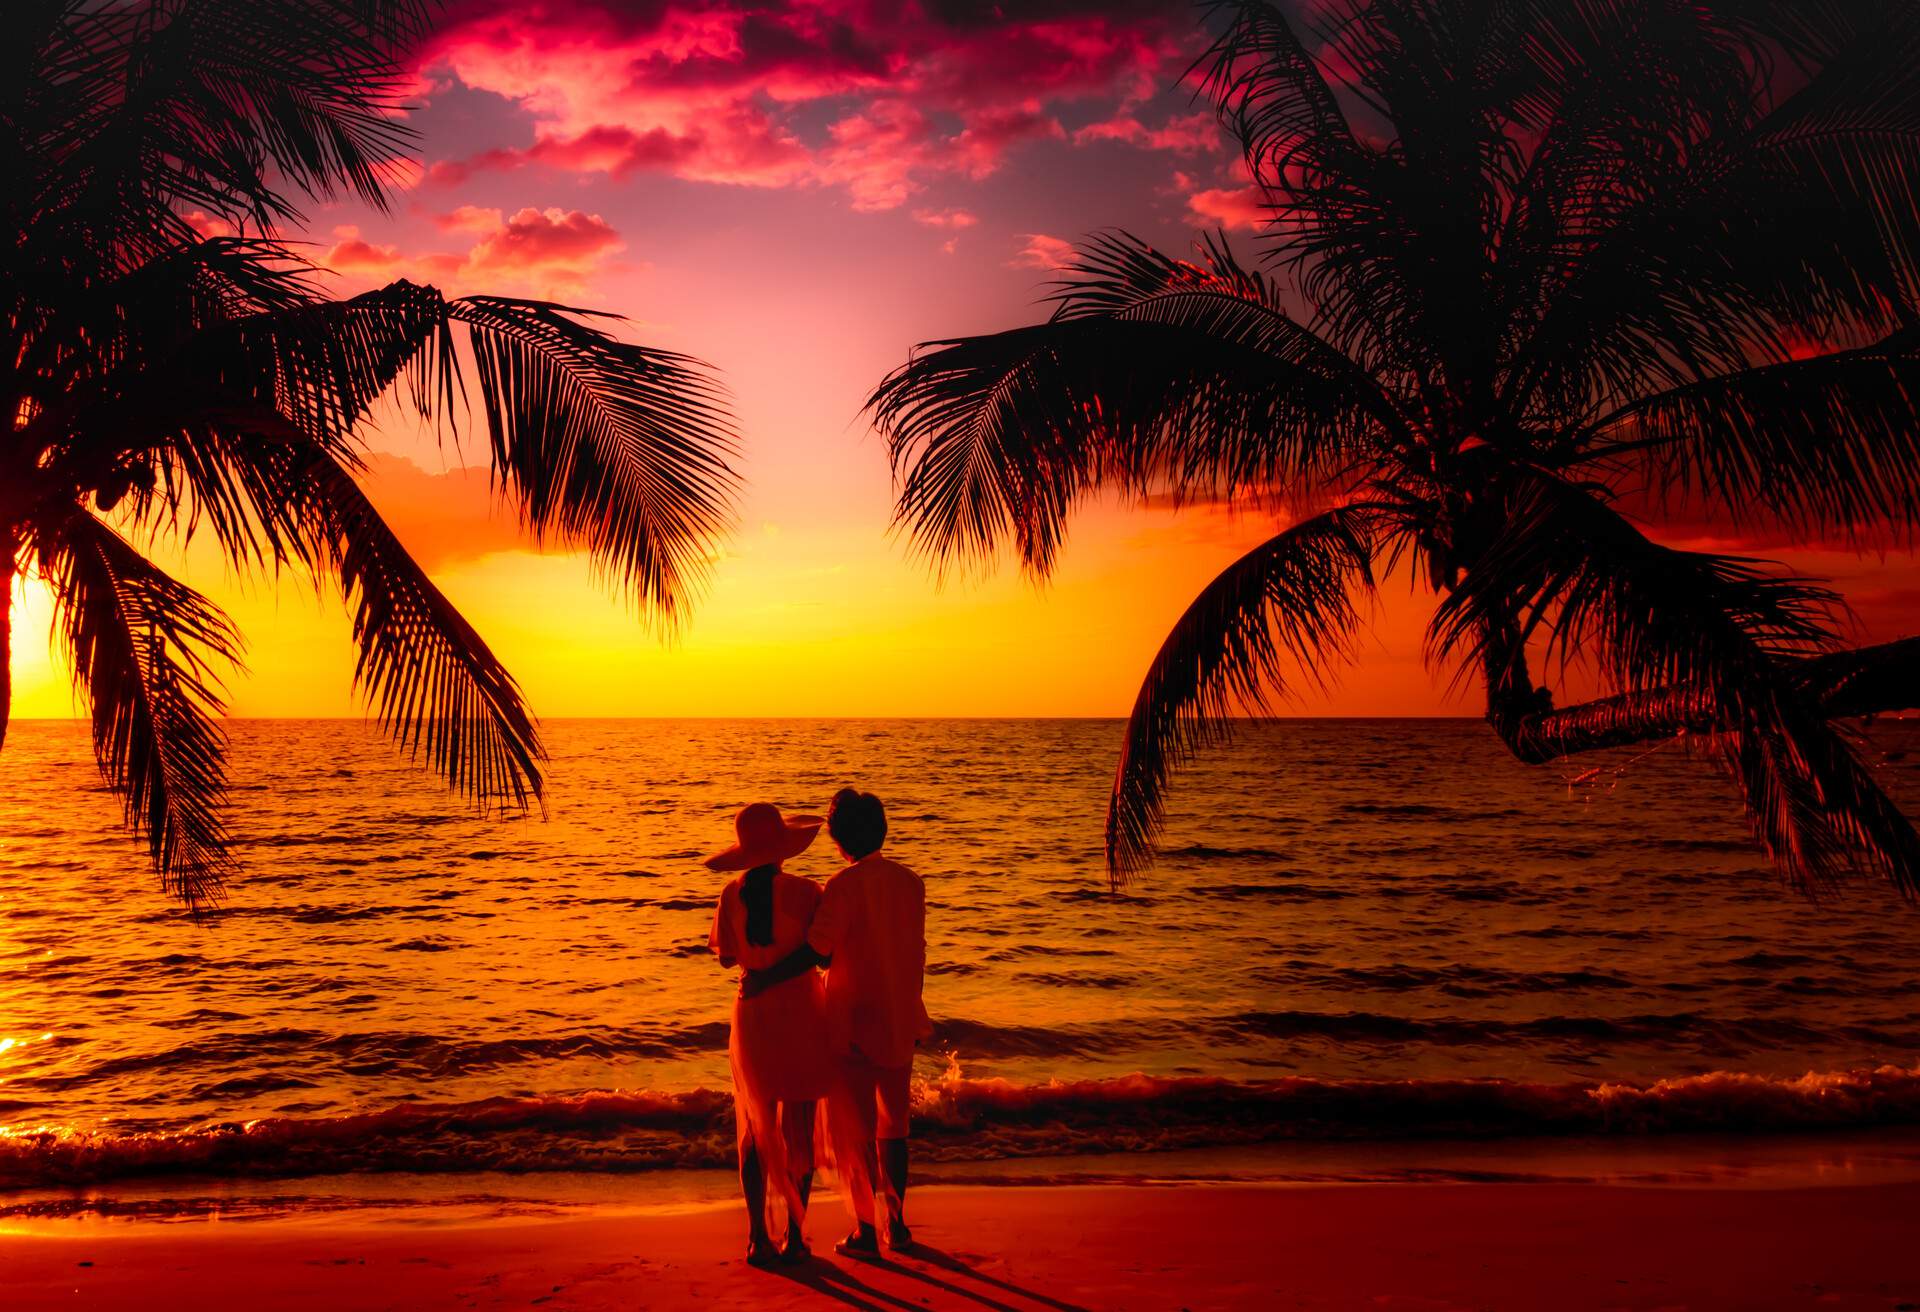 A couple on the shore of a tropical beach against the scenic sunset sky.